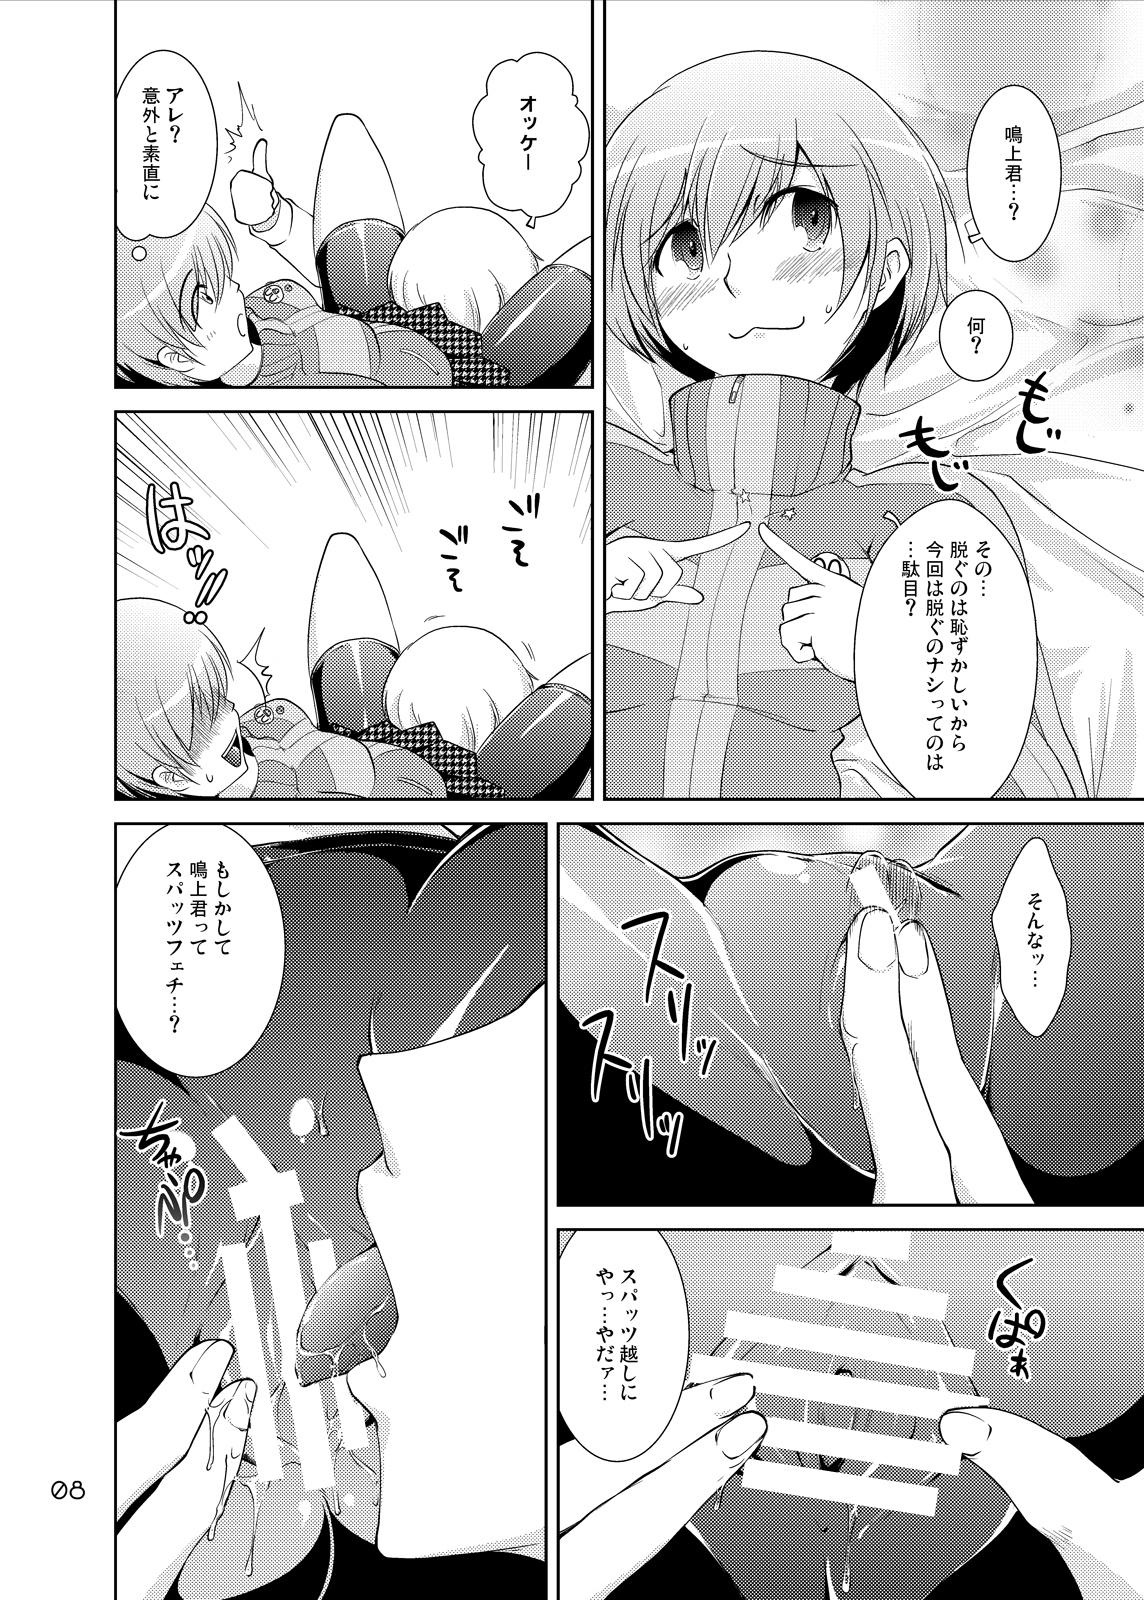 Hotwife S4U spats forever The UNDERGROUND insert SATONAKA CHIE - Persona 4 Casado - Page 7